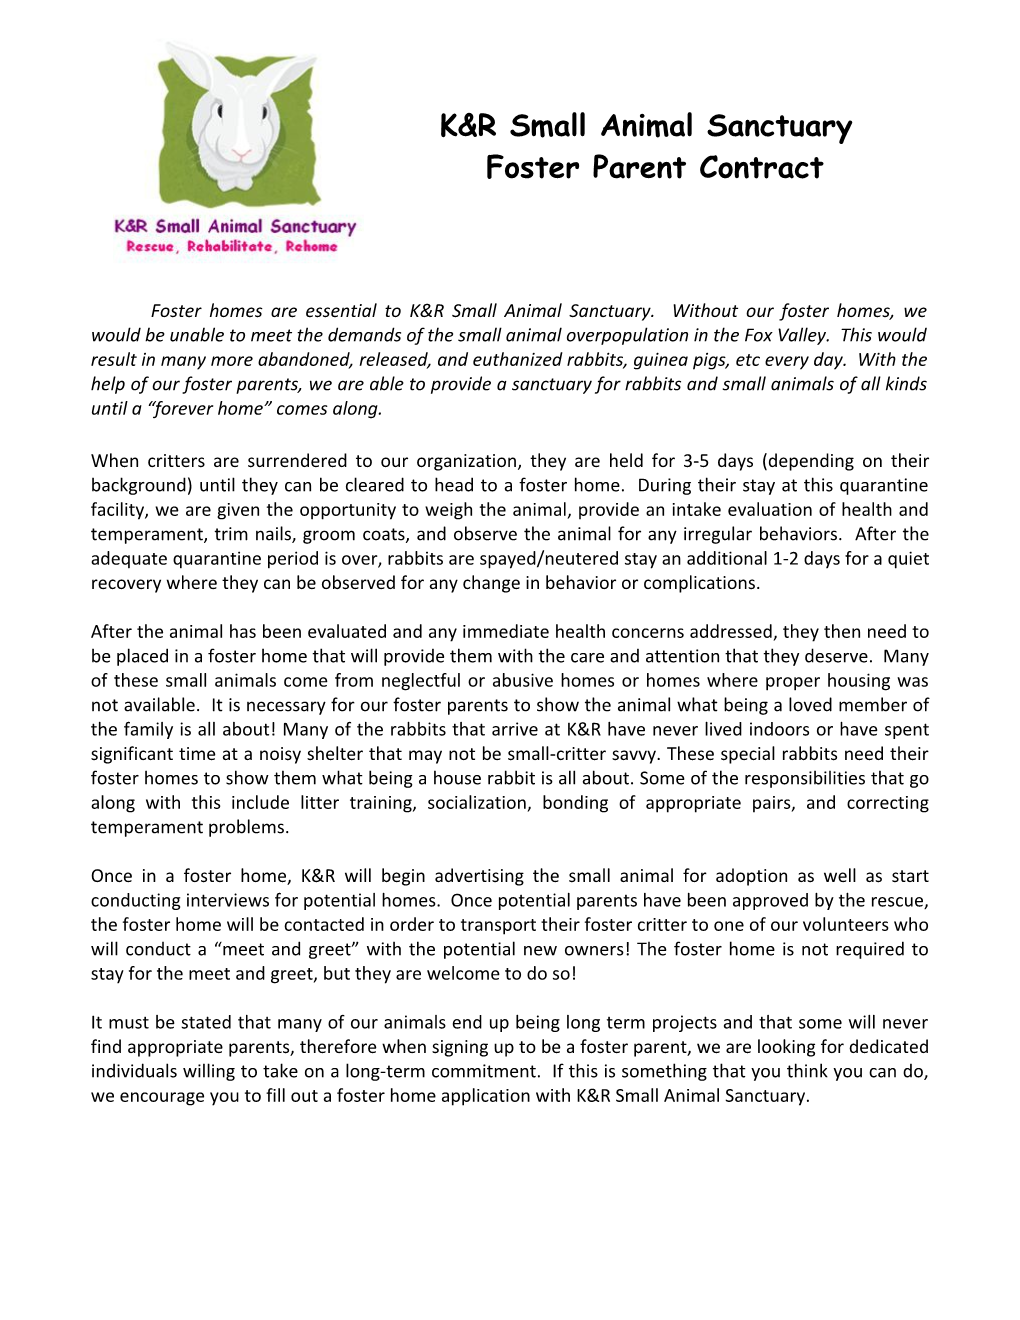 Foster Parent Contract